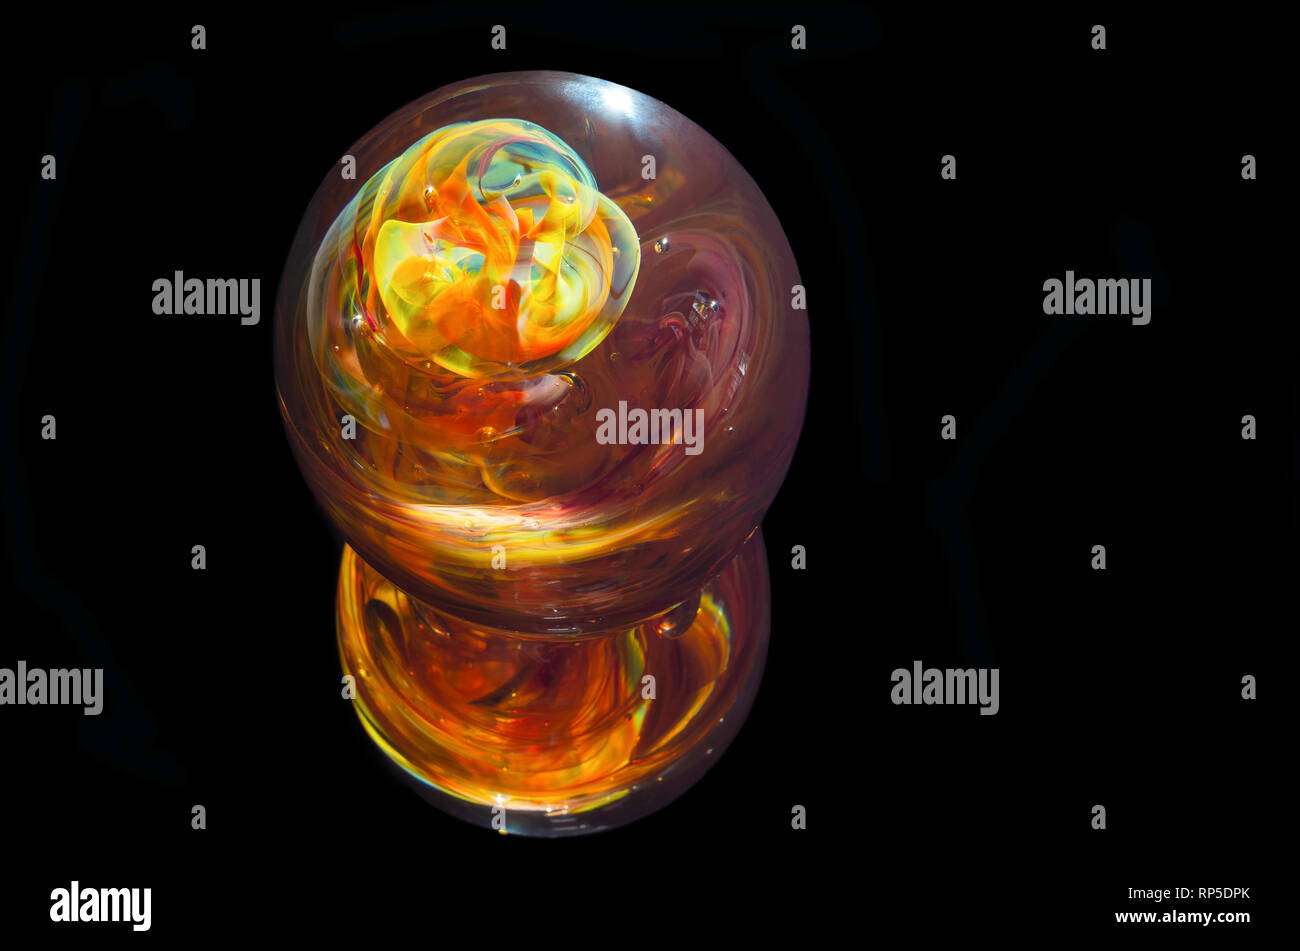 multicolored glass paperweight and reflection isolated against black Stock Photo